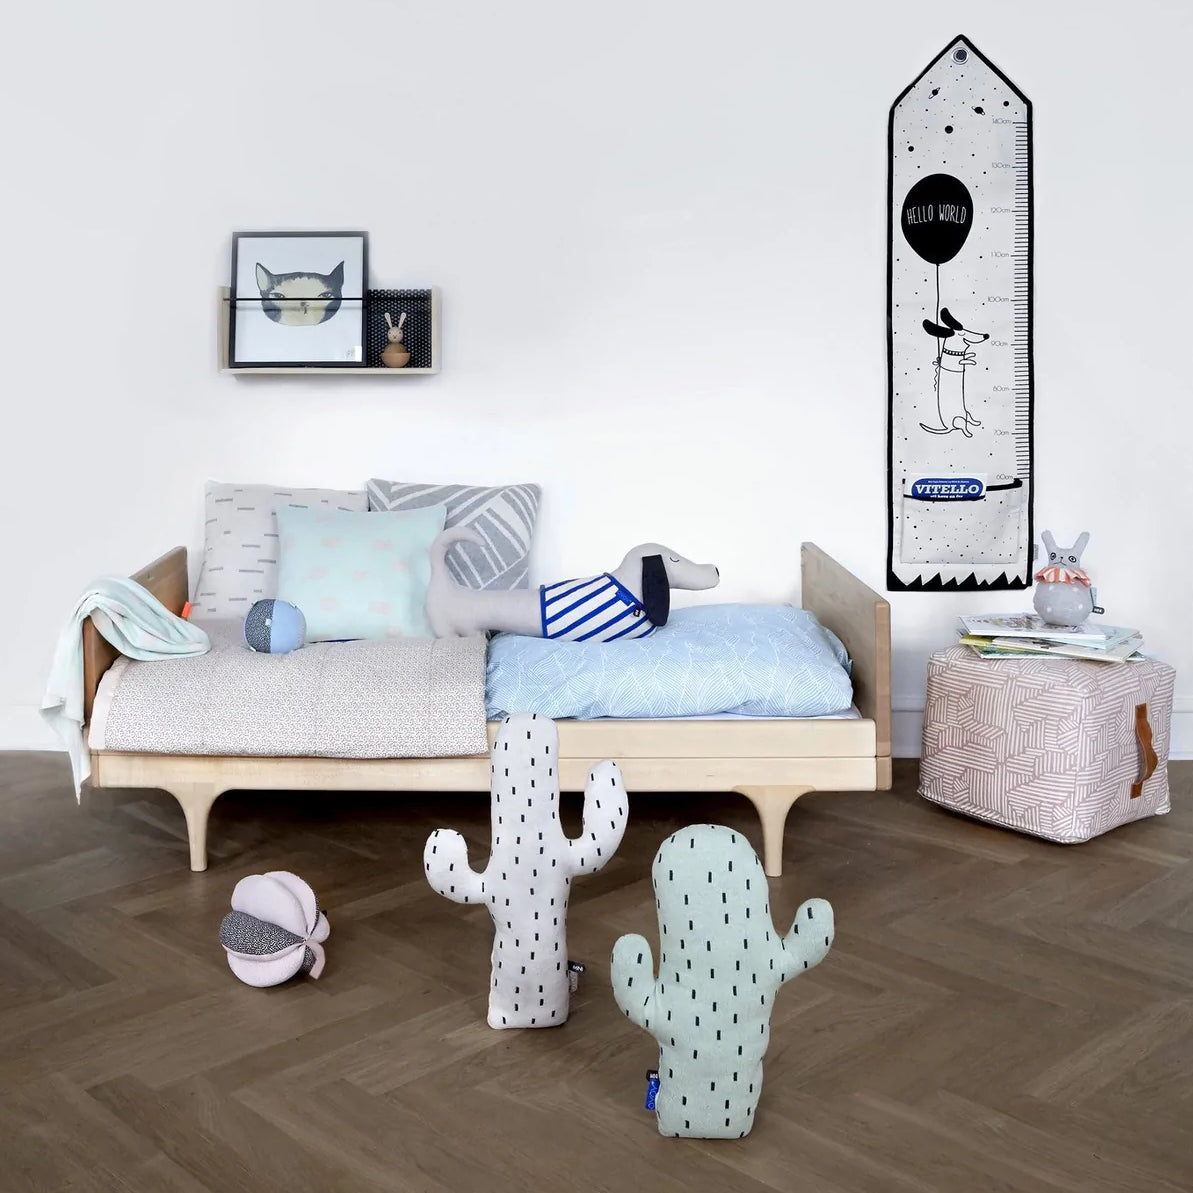 the quirky cactus cushions by OYOY take centre stage in this Scandinavian inspired children's room setting